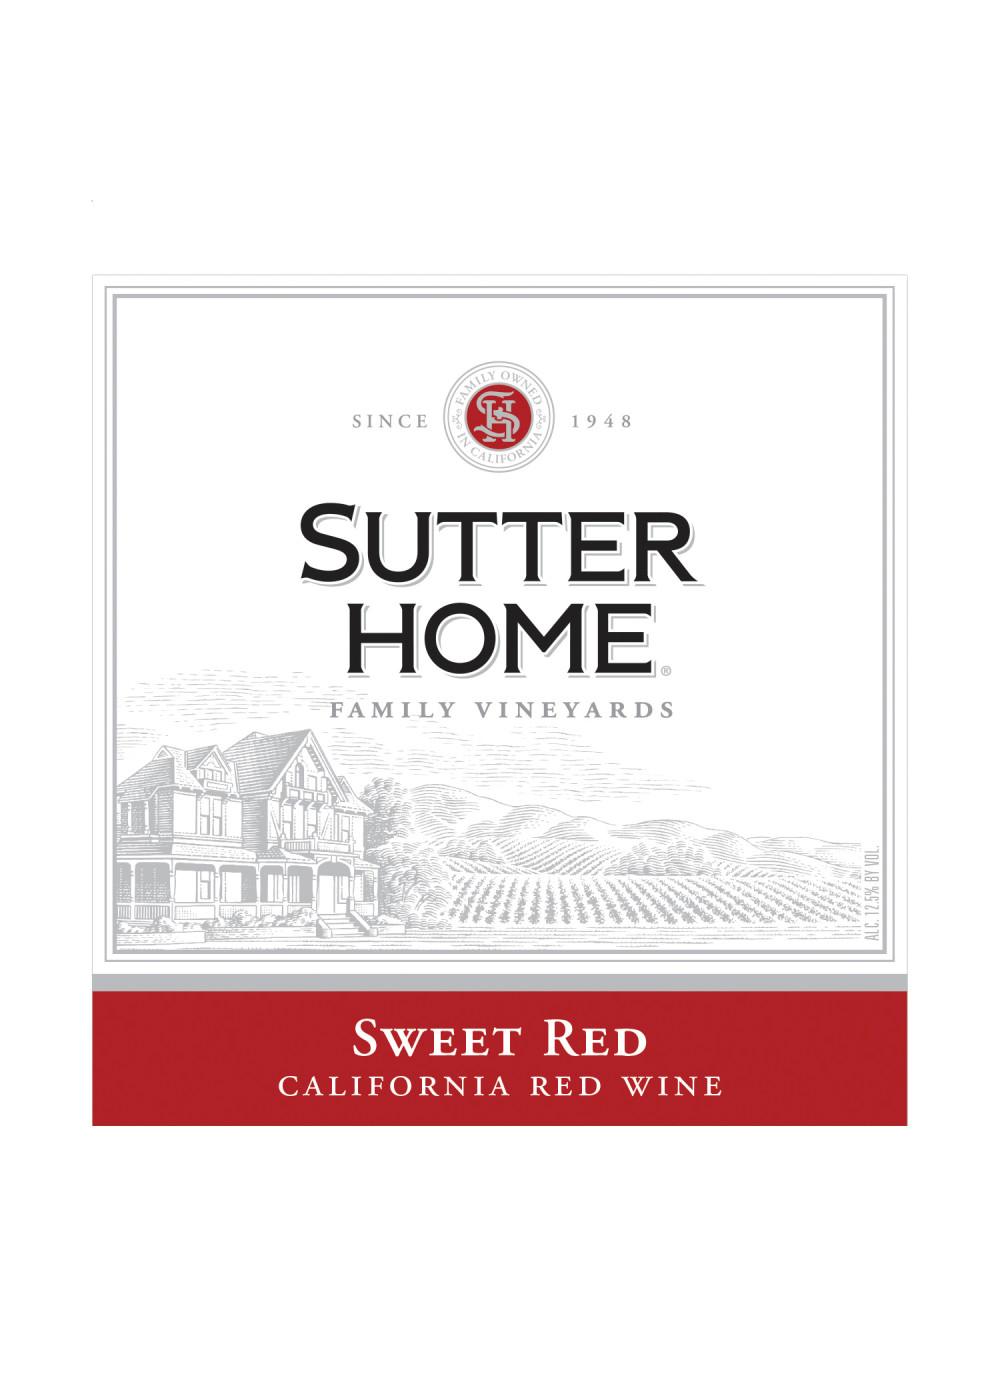 Sutter Home Family Vineyards Sweet Red Wine; image 2 of 4